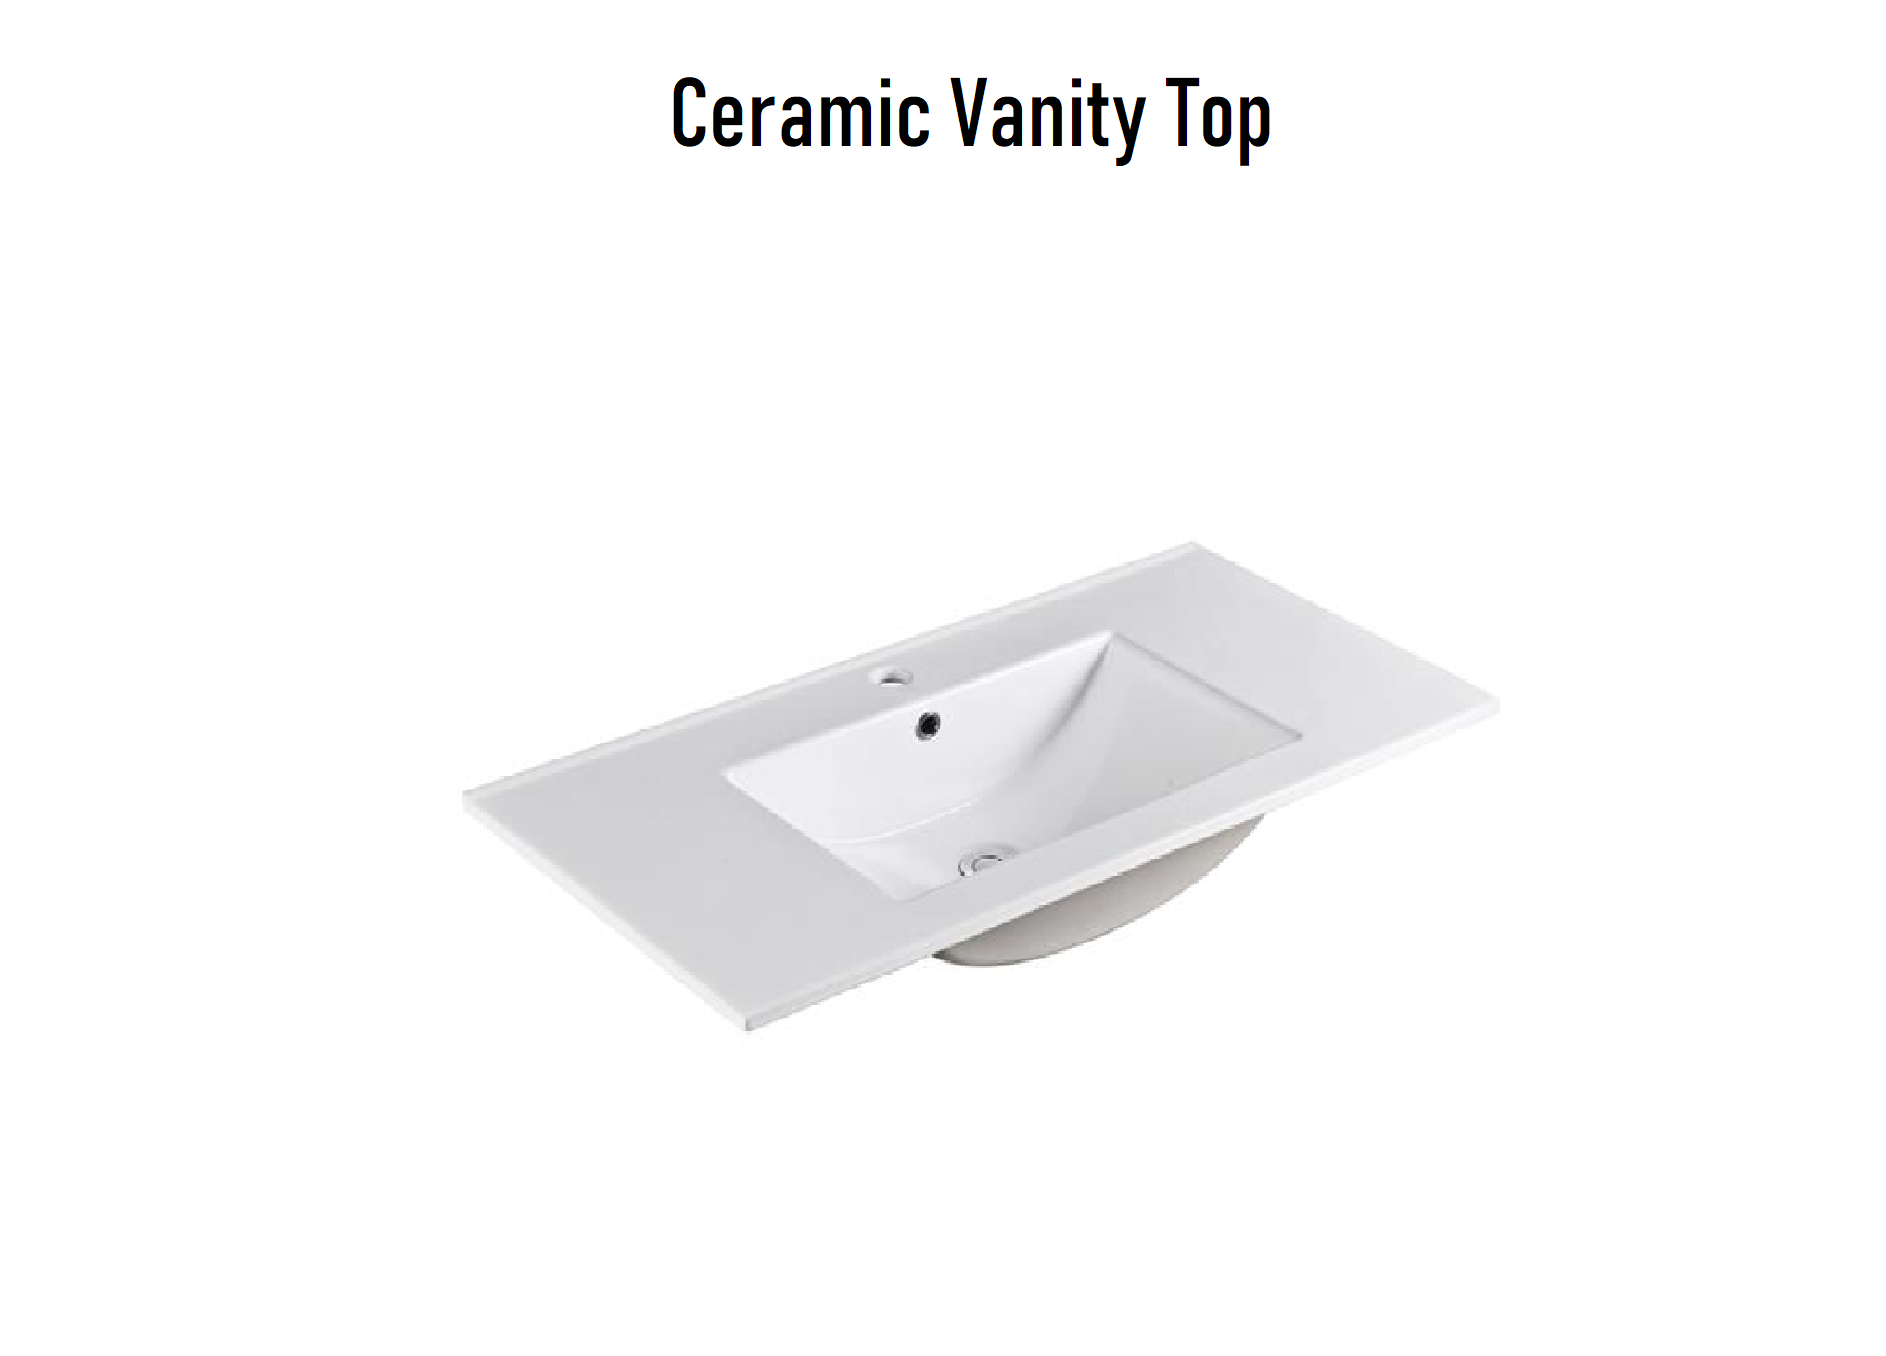 POSEIDON WHITE 750MM SPACE SAVING SINGLE BOWL FLOOR STANDING VANITY AVAILABLE IN LEFT HAND DRAWER AND RIGHT HAND DRAWER